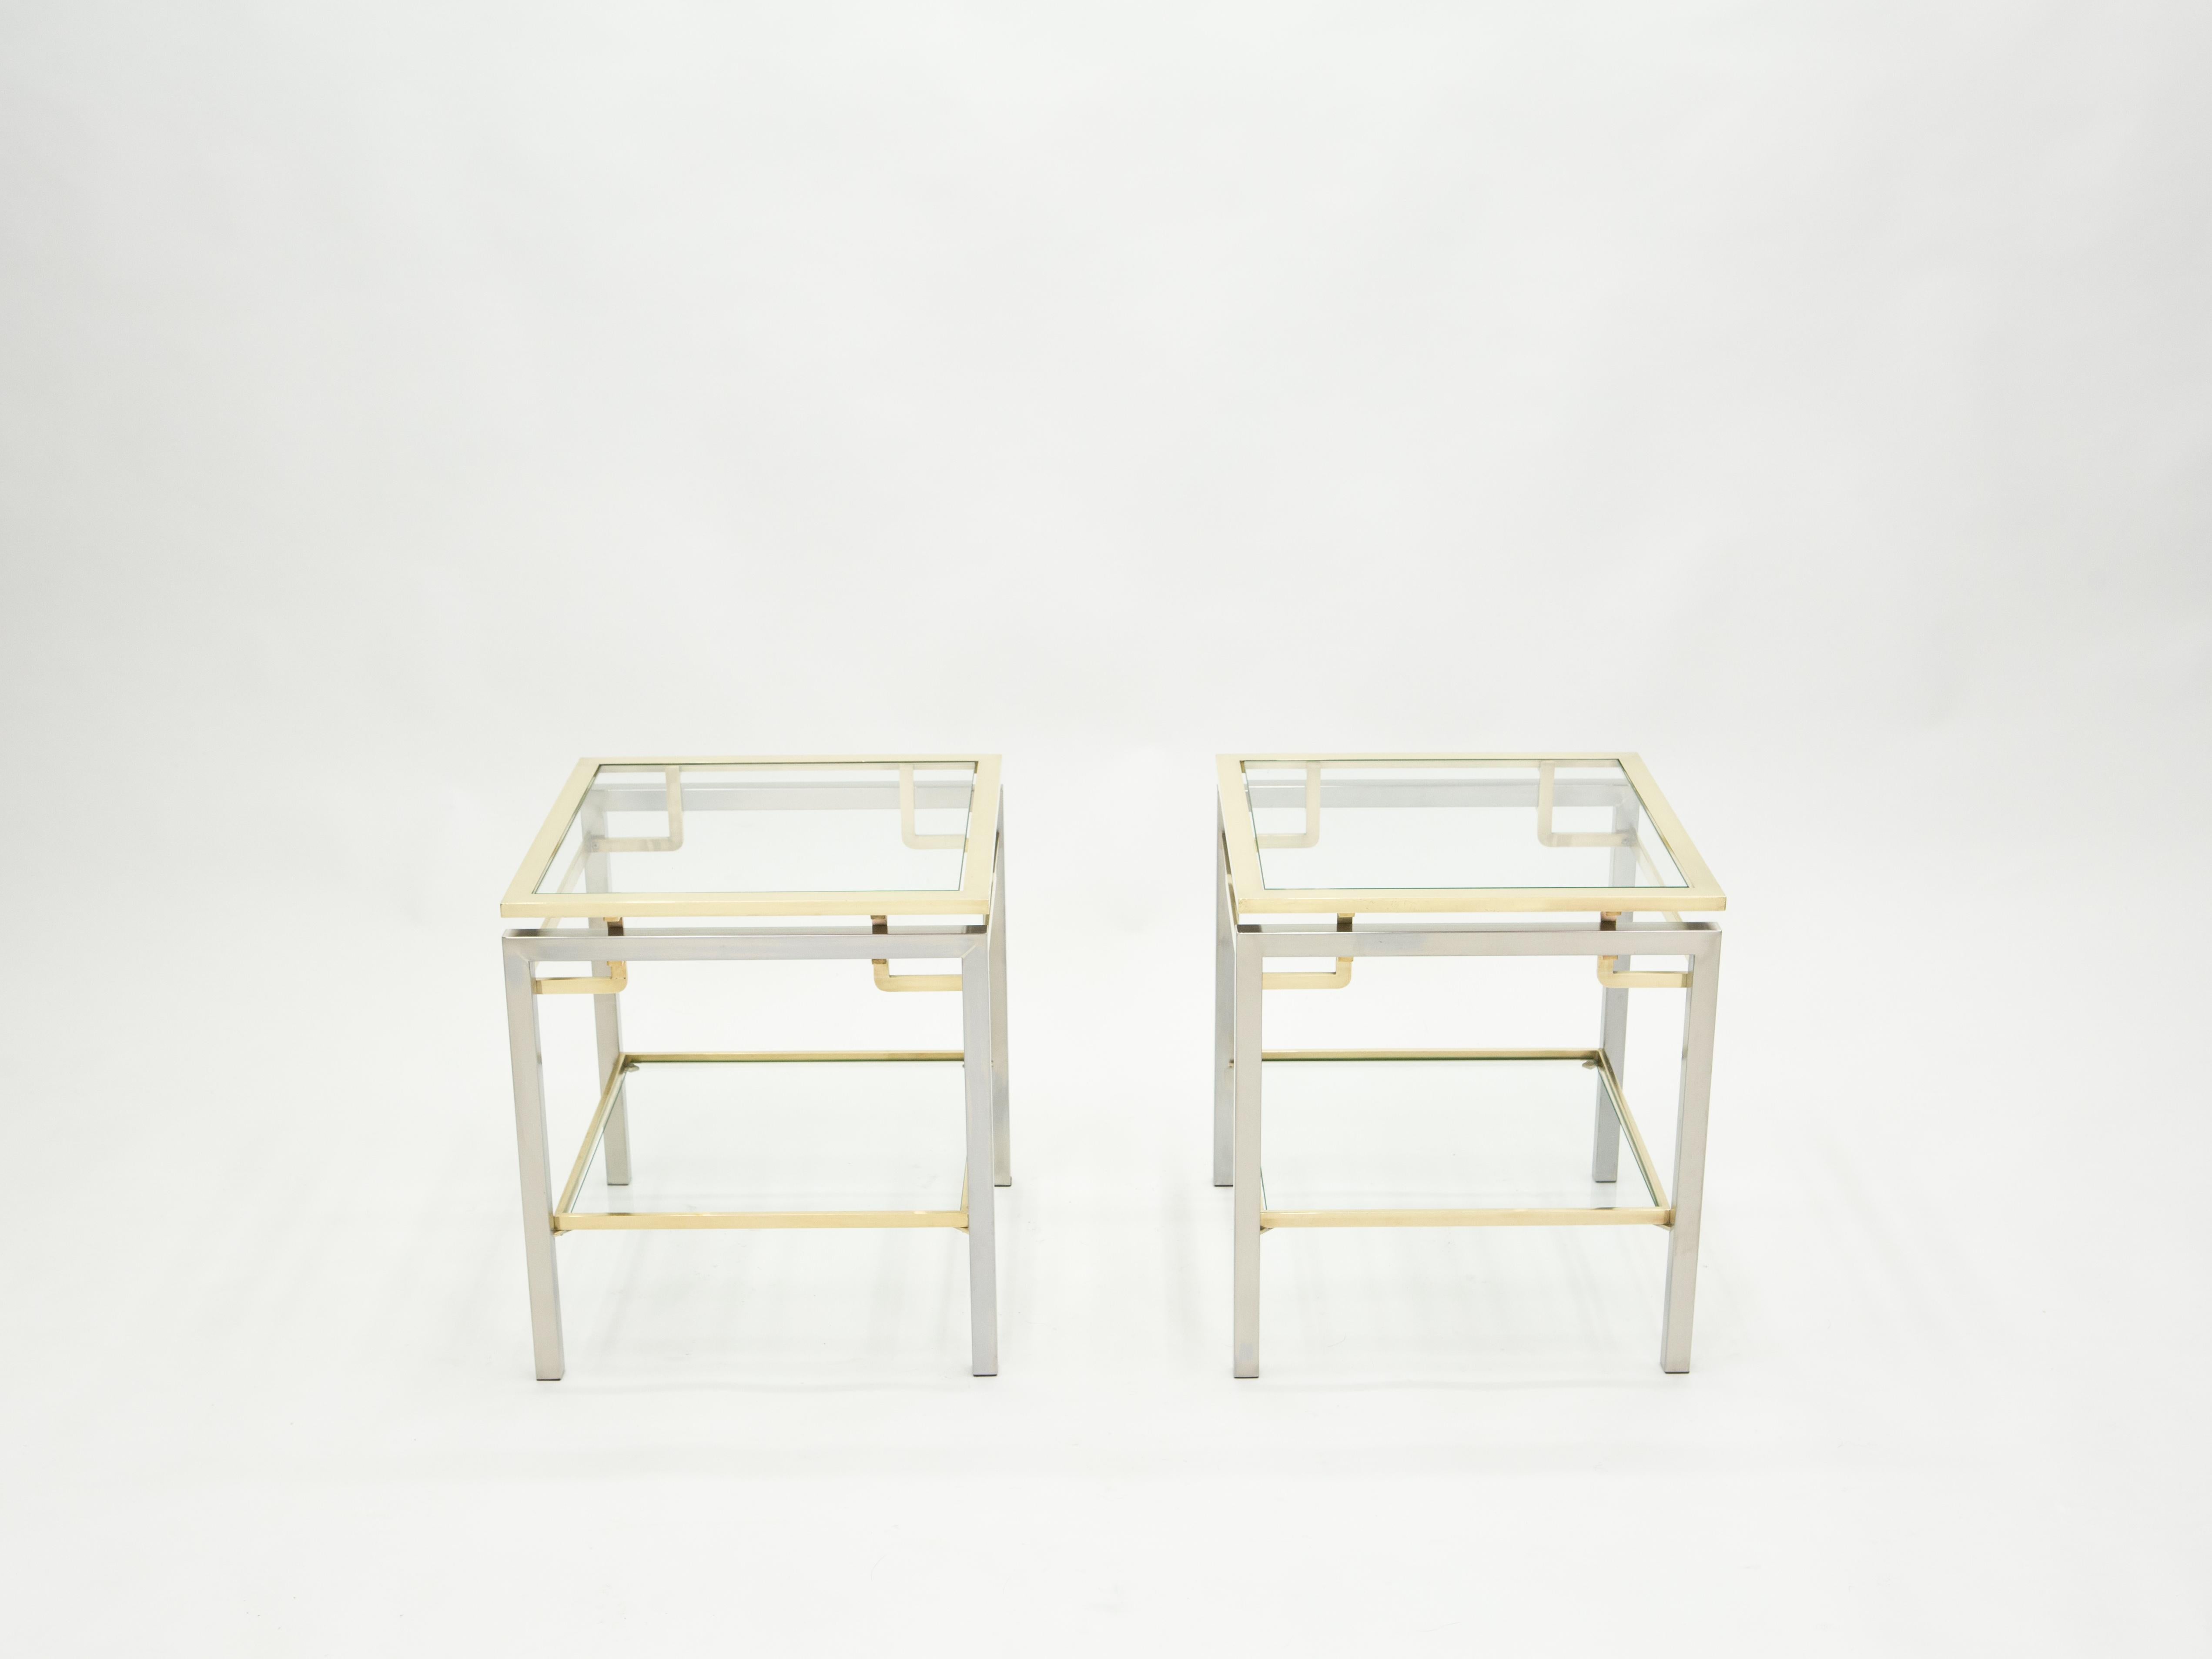 Late 20th Century French Brass Steel Two-Tier End Tables Guy Lefevre for Maison Jansen, 1970s